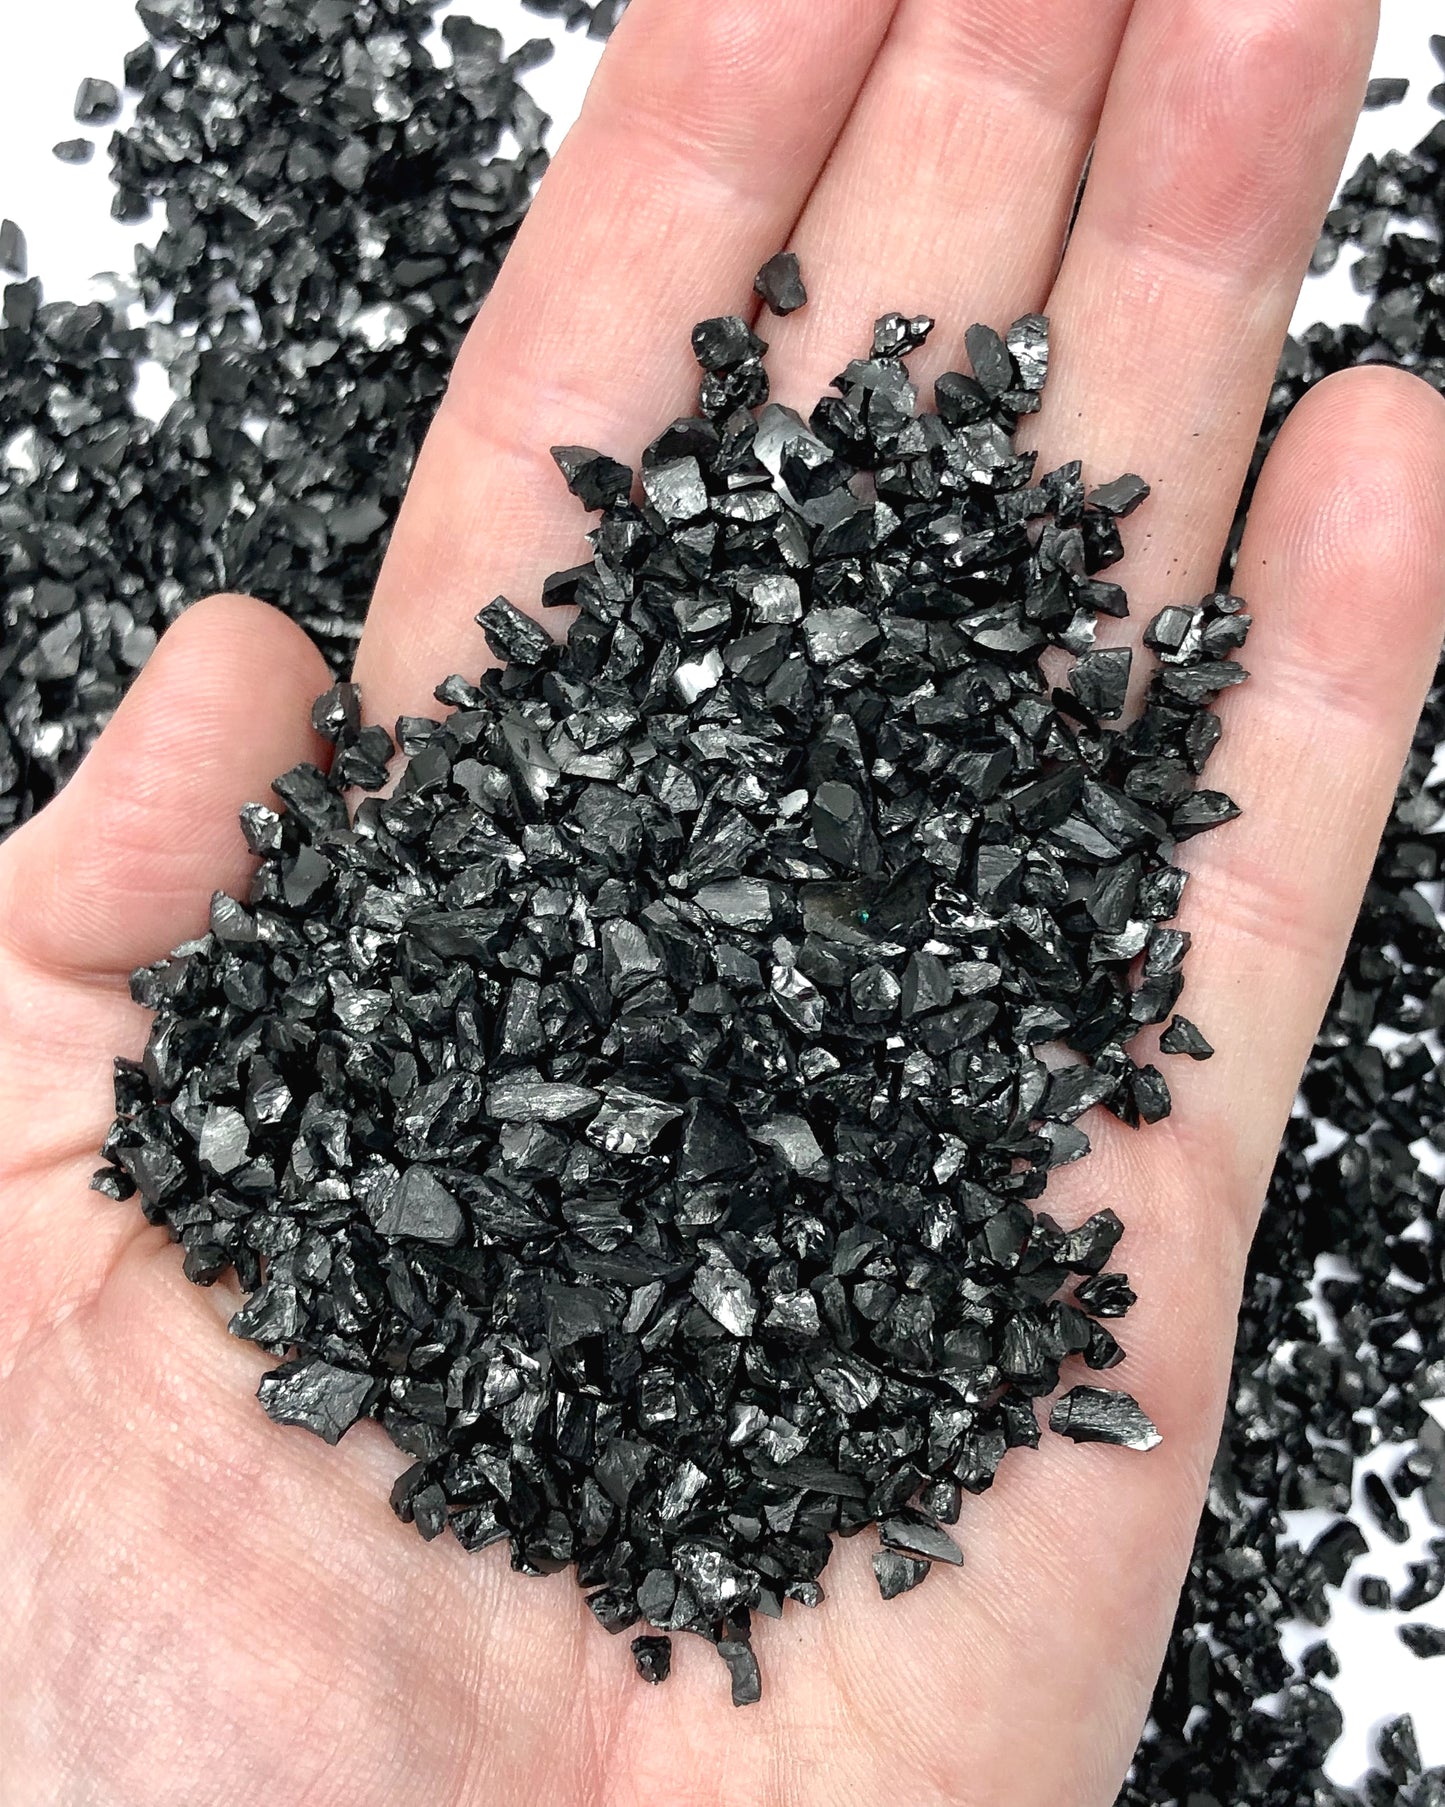 Crushed Black Jet from The United States, Coarse Crush, Gravel Size, 4mm - 2mm